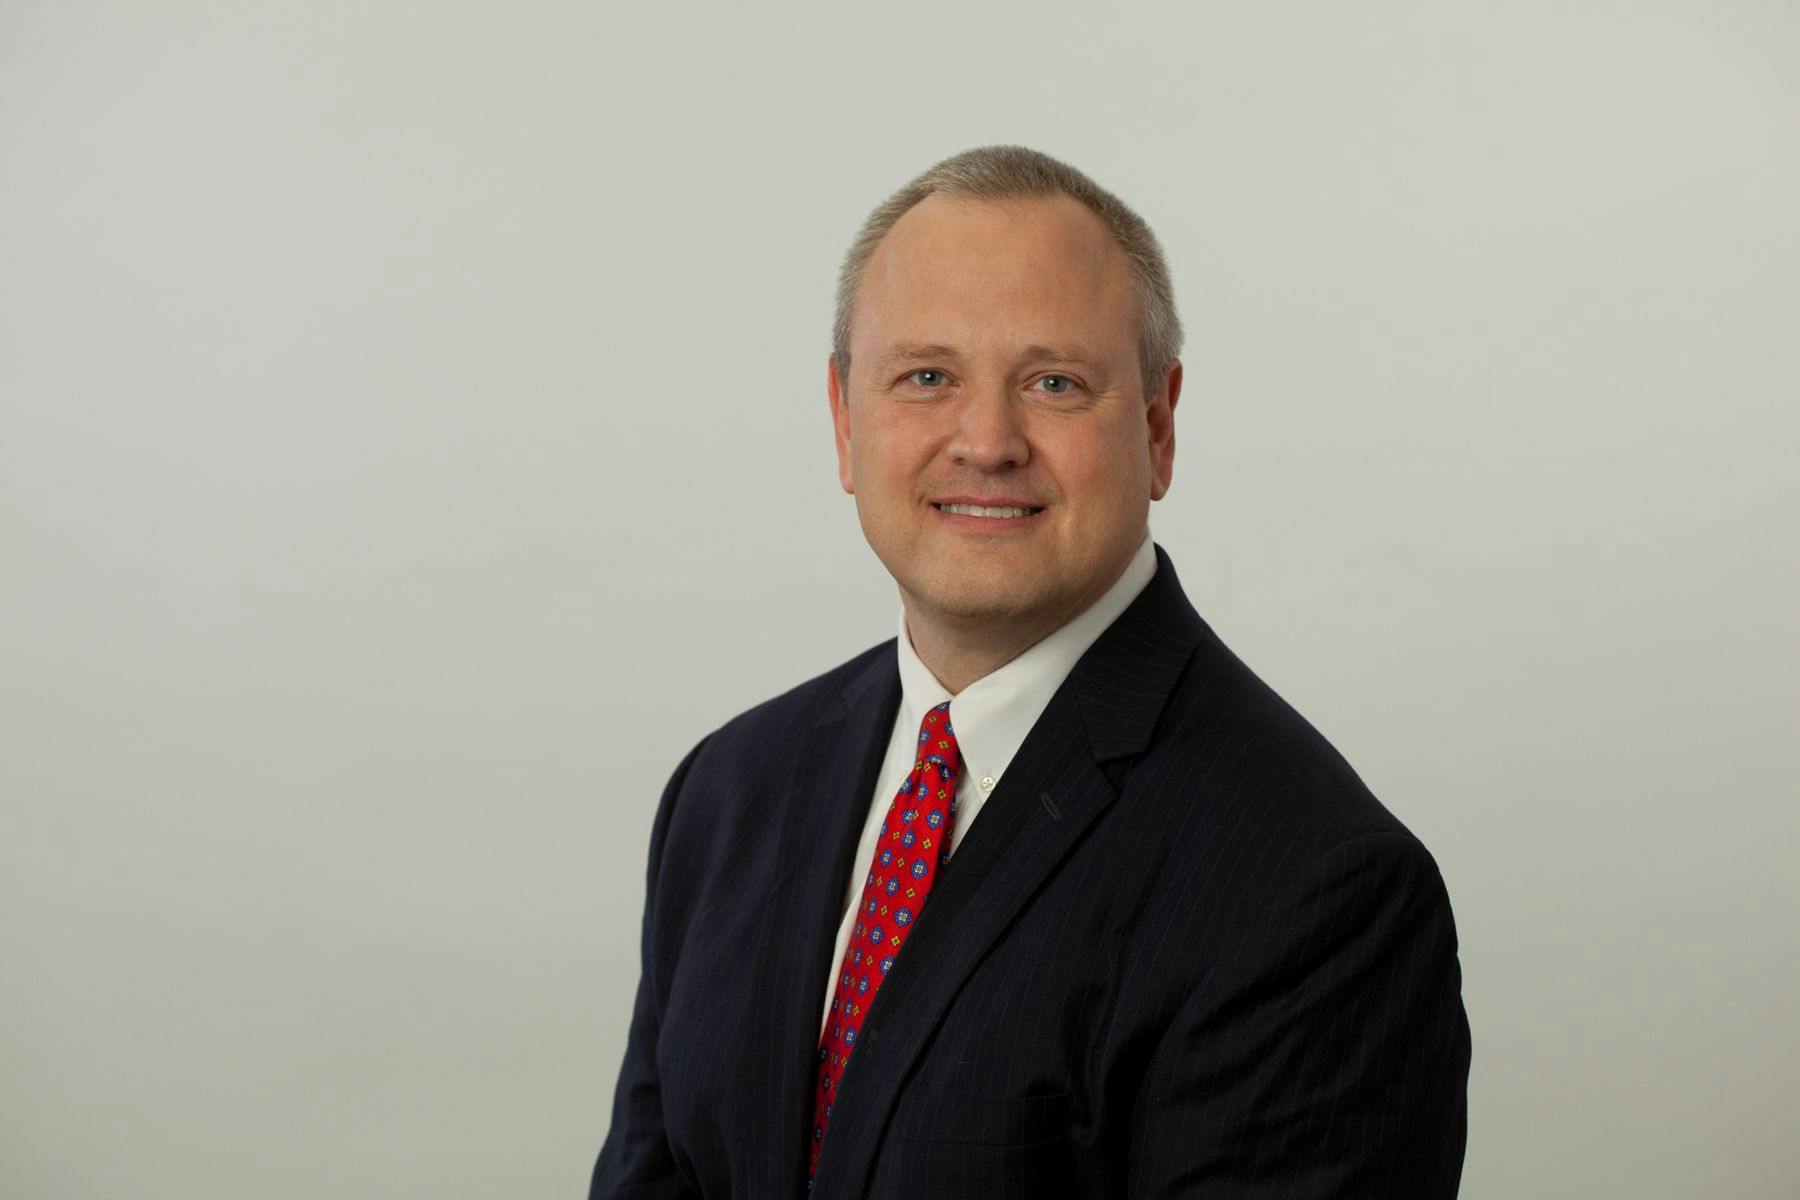 Robert C. McDonald, MD, MBA

McDonald is president and founder of Aledo Consulting in Indianapolis, Indiana.